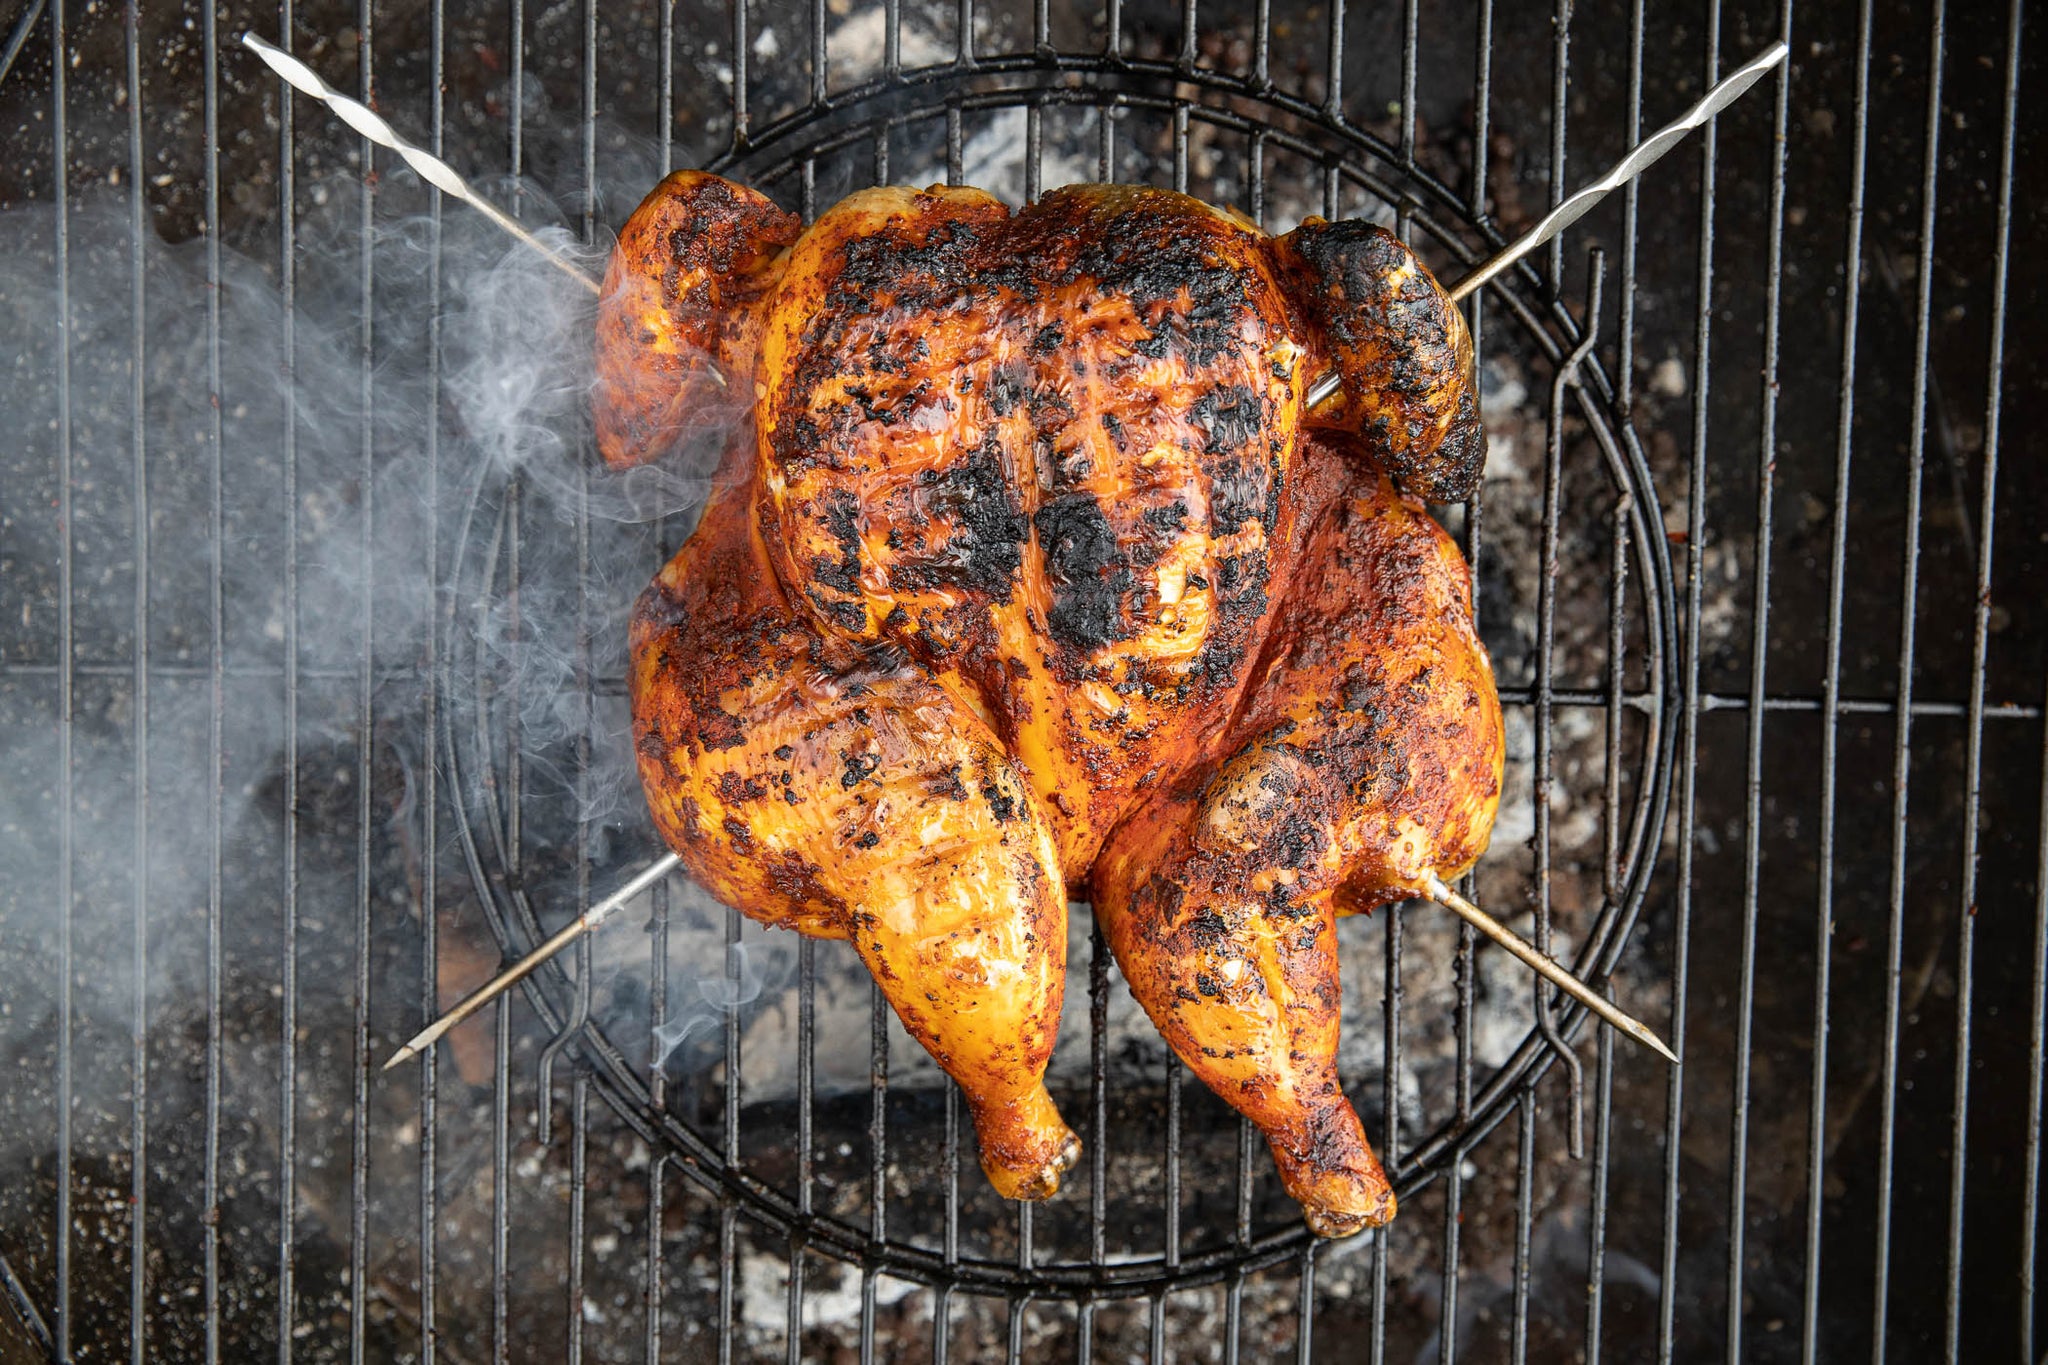 perfectly cooked free range, herb-fed spatchcock chicken on the bbq